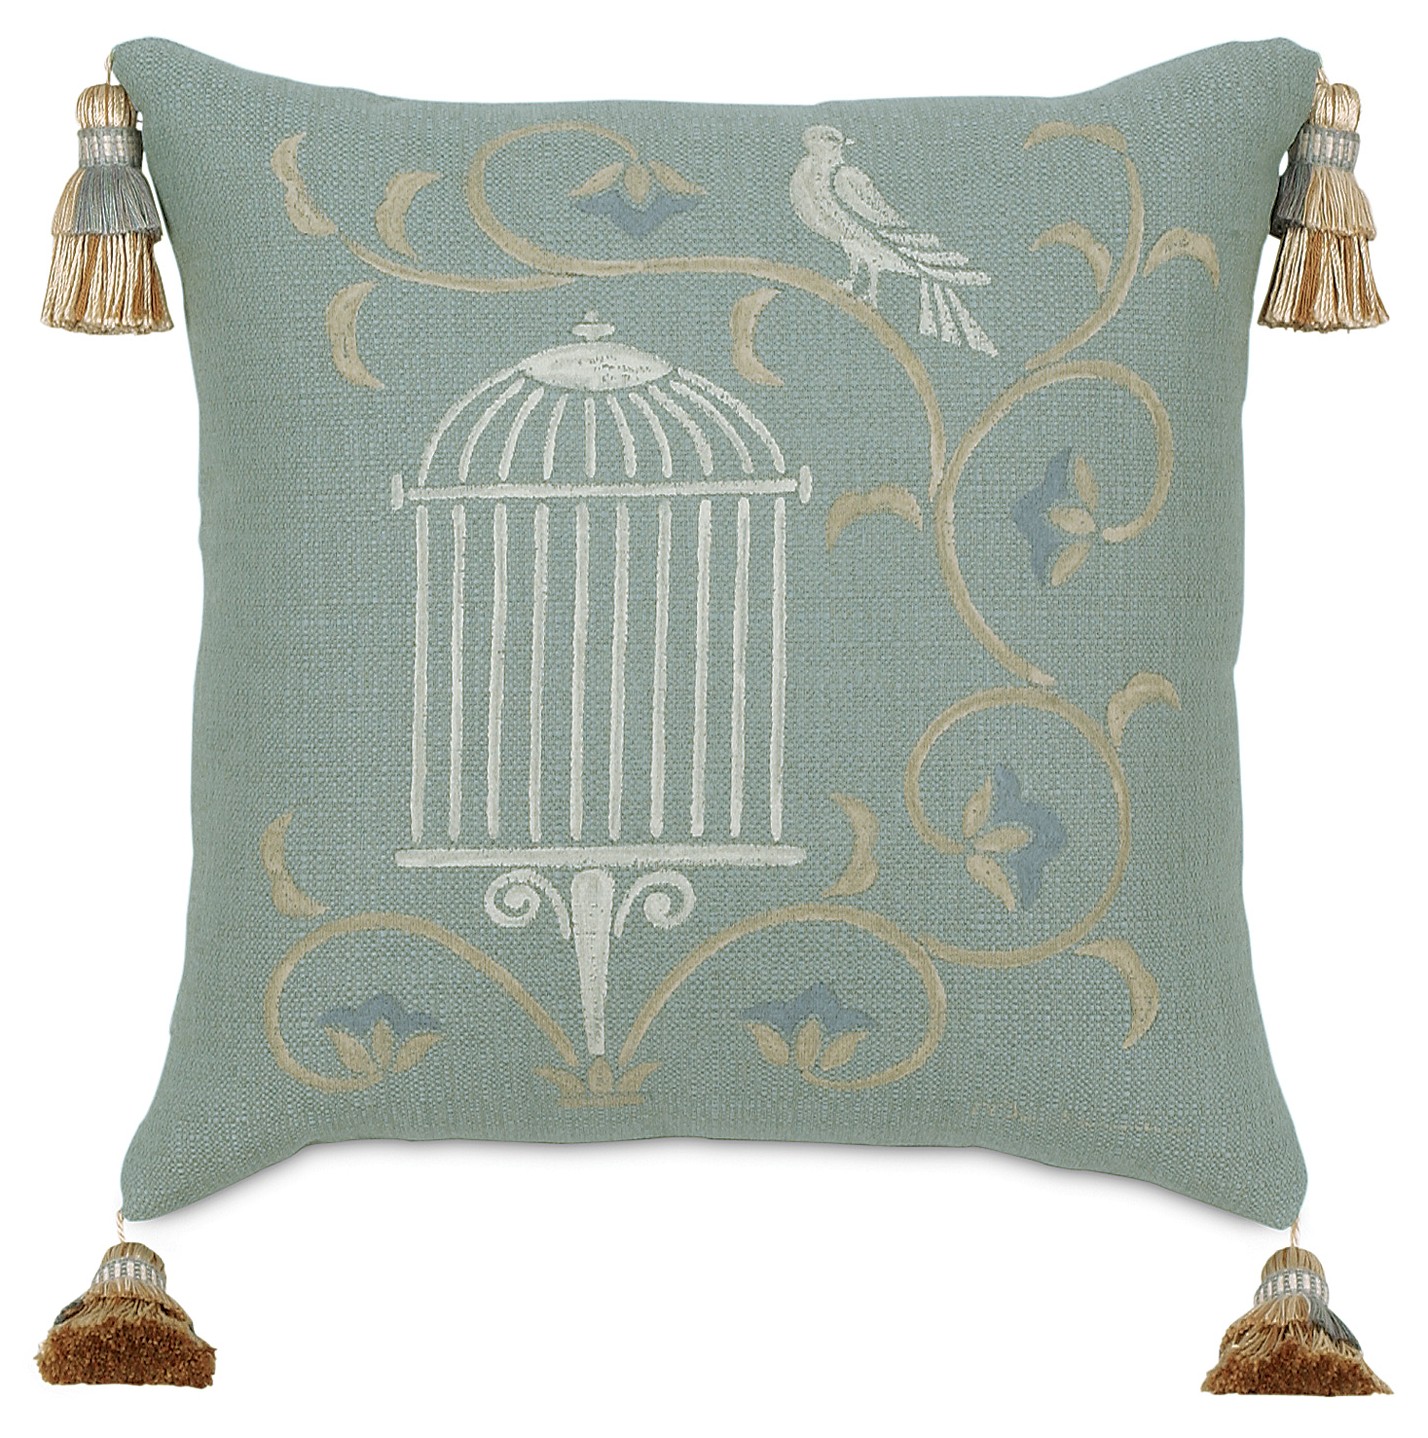 Eastern Accents Bird and Cage pillow